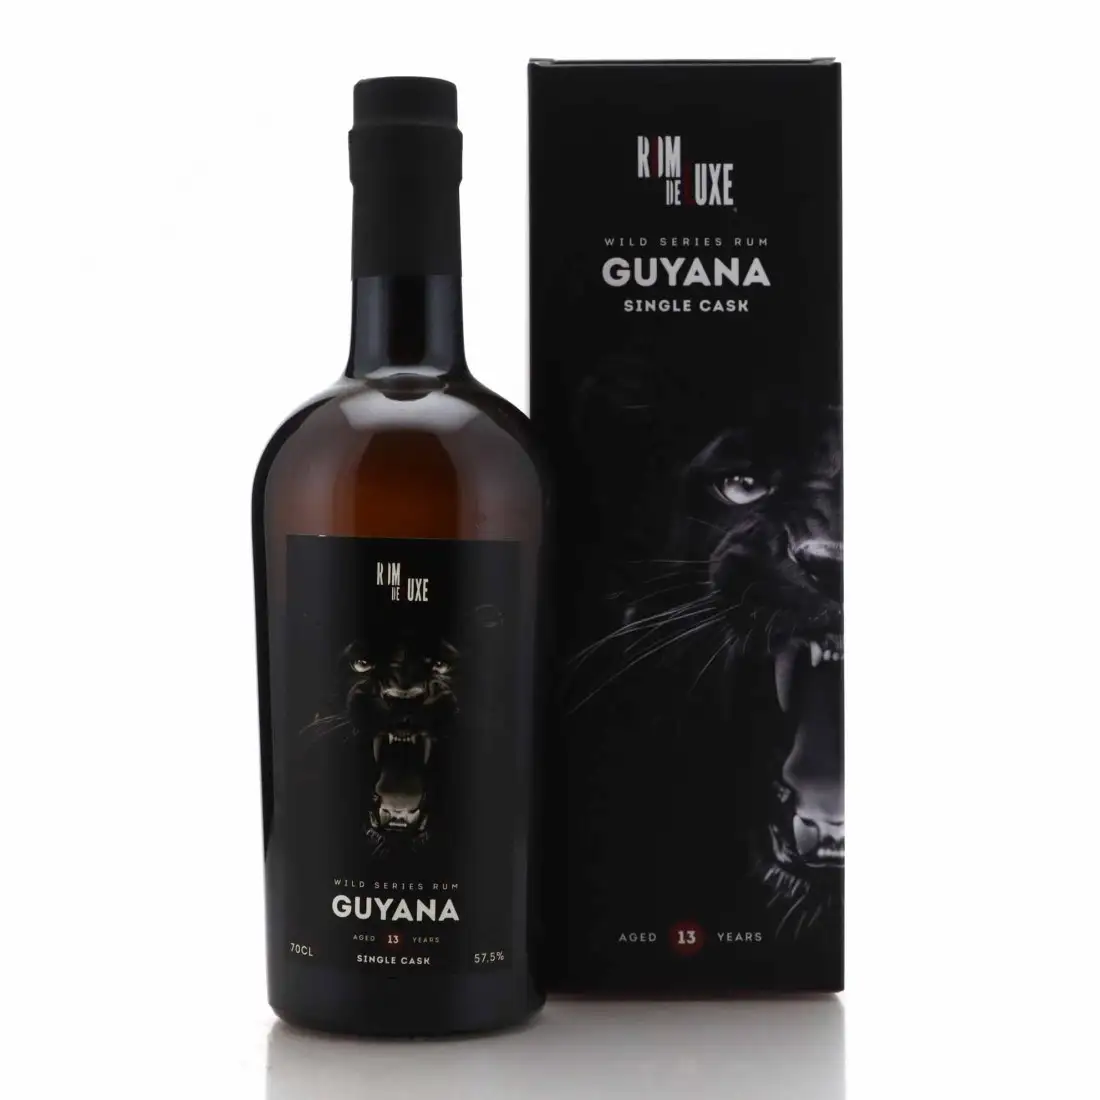 Image of the front of the bottle of the rum Wild Series Rum Guyana No. 51